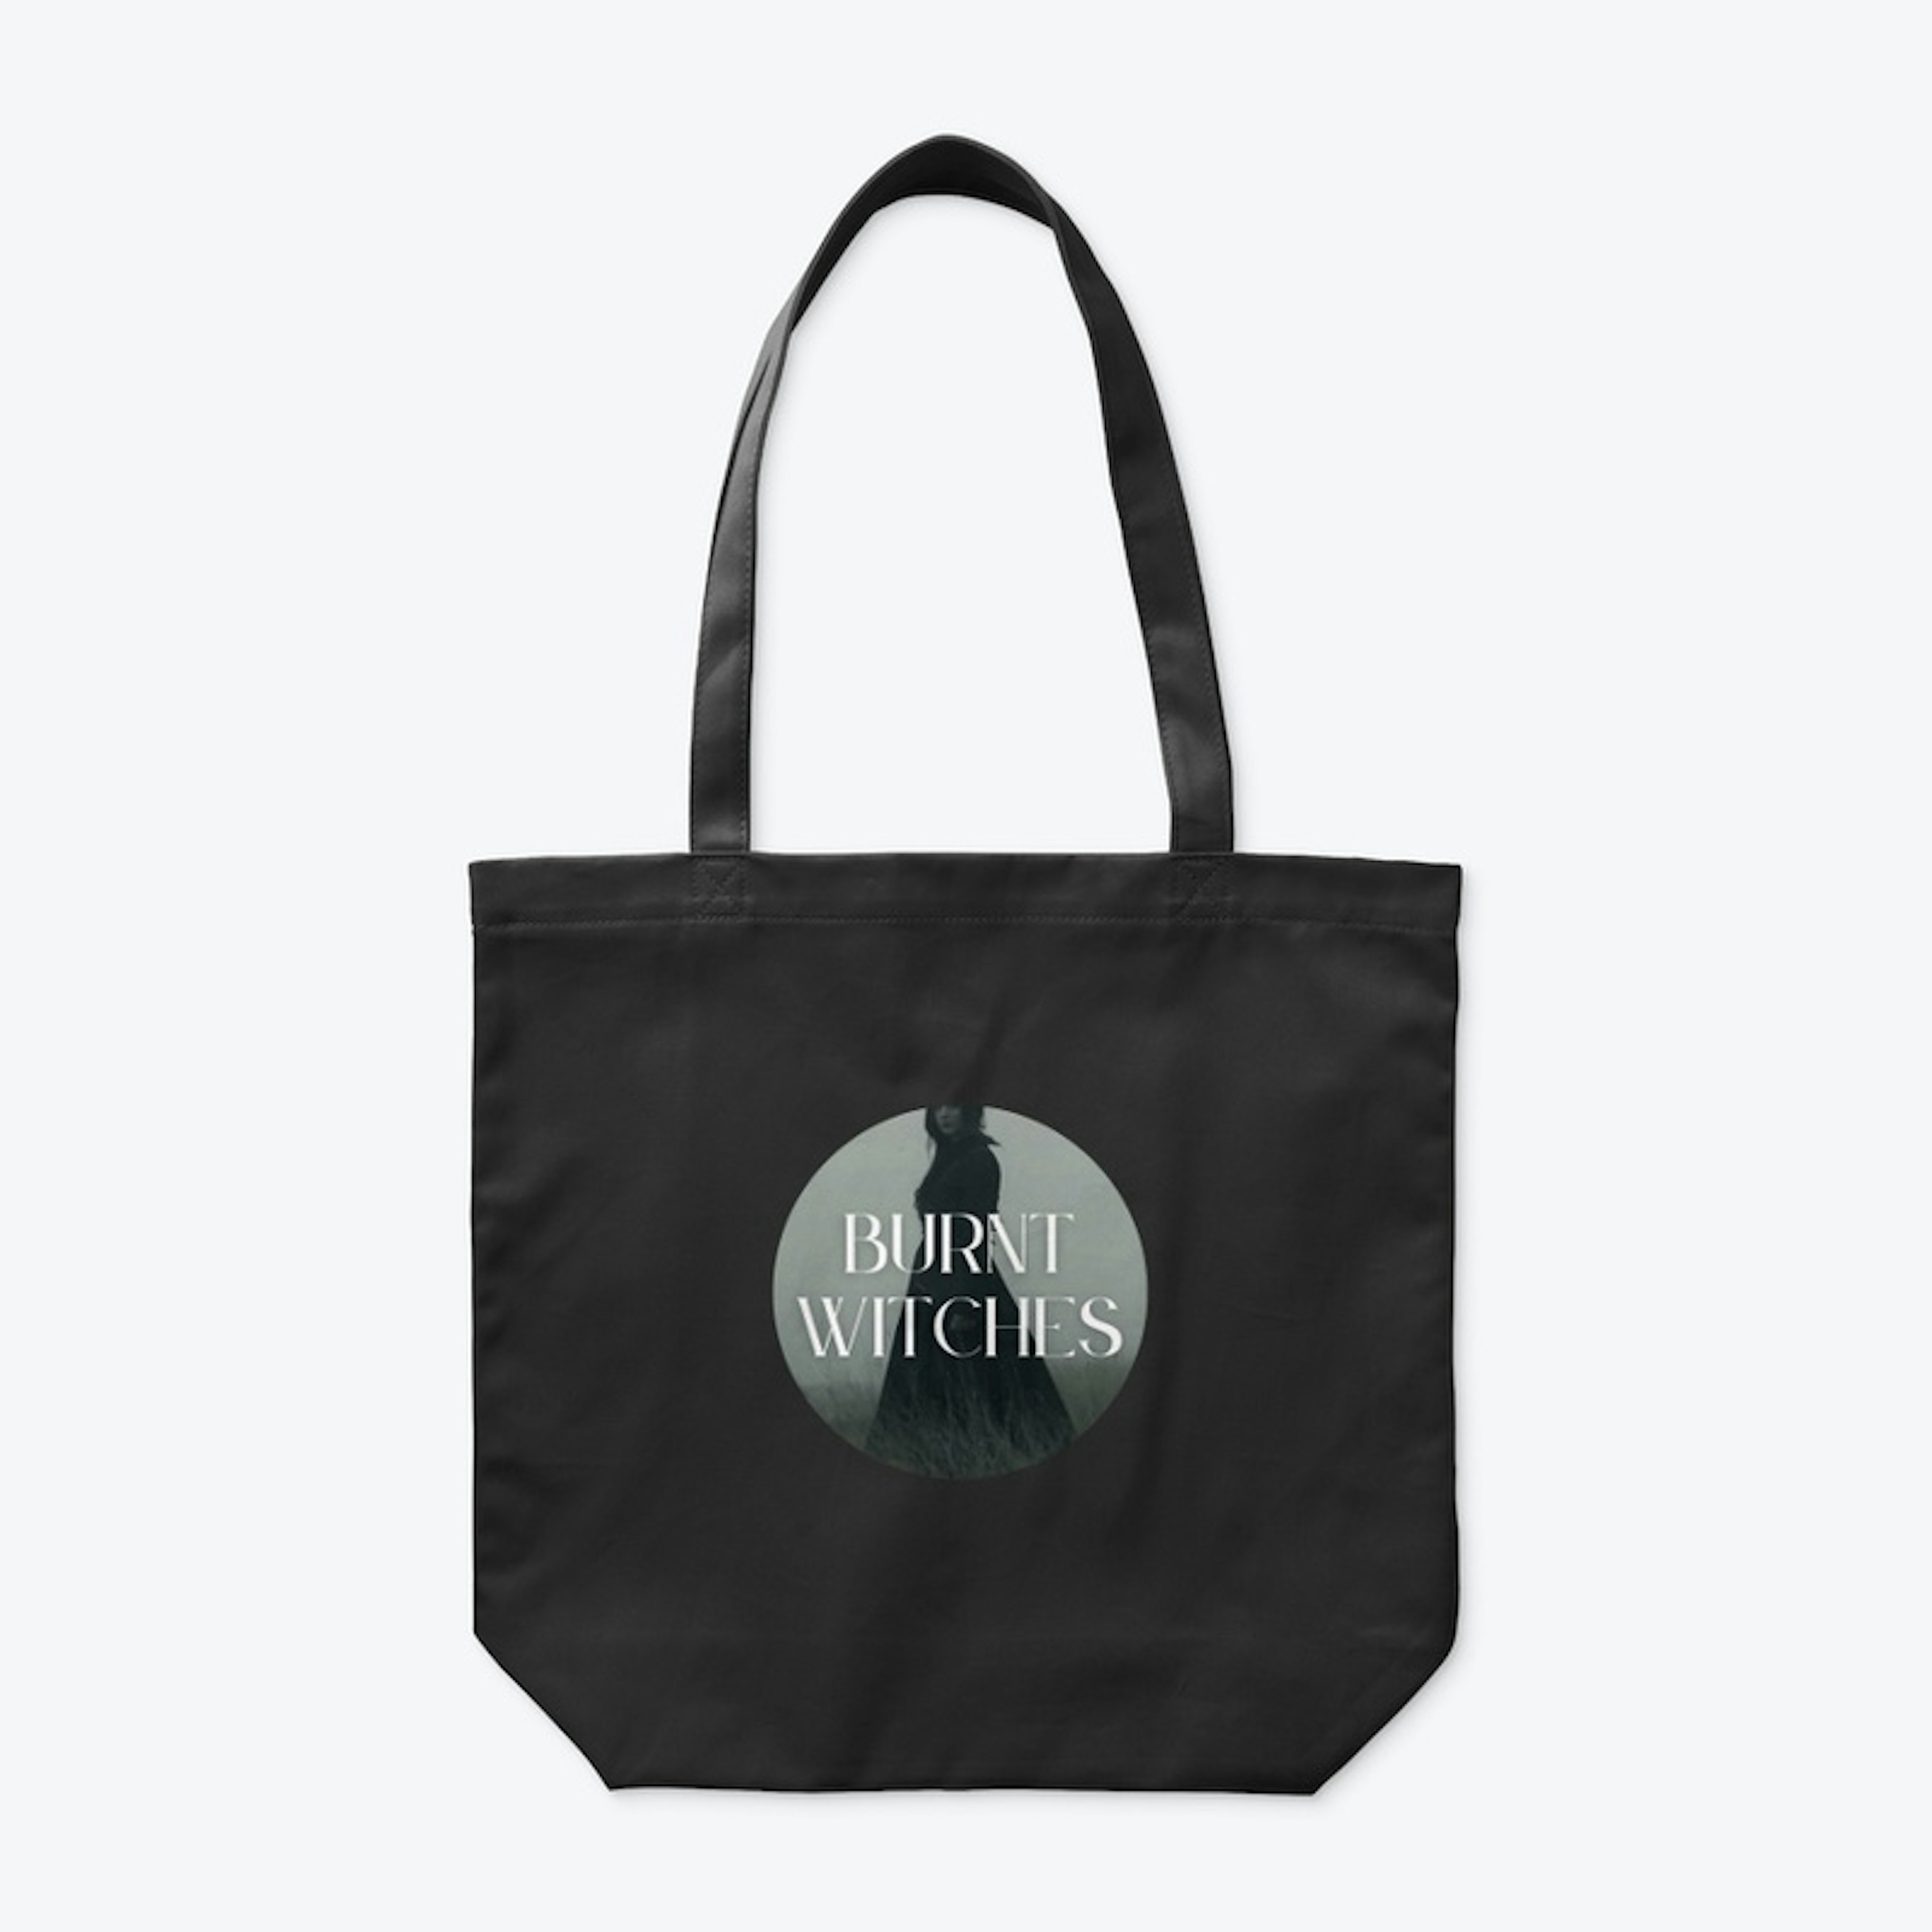 Burnt Witches Organic Tote Bag